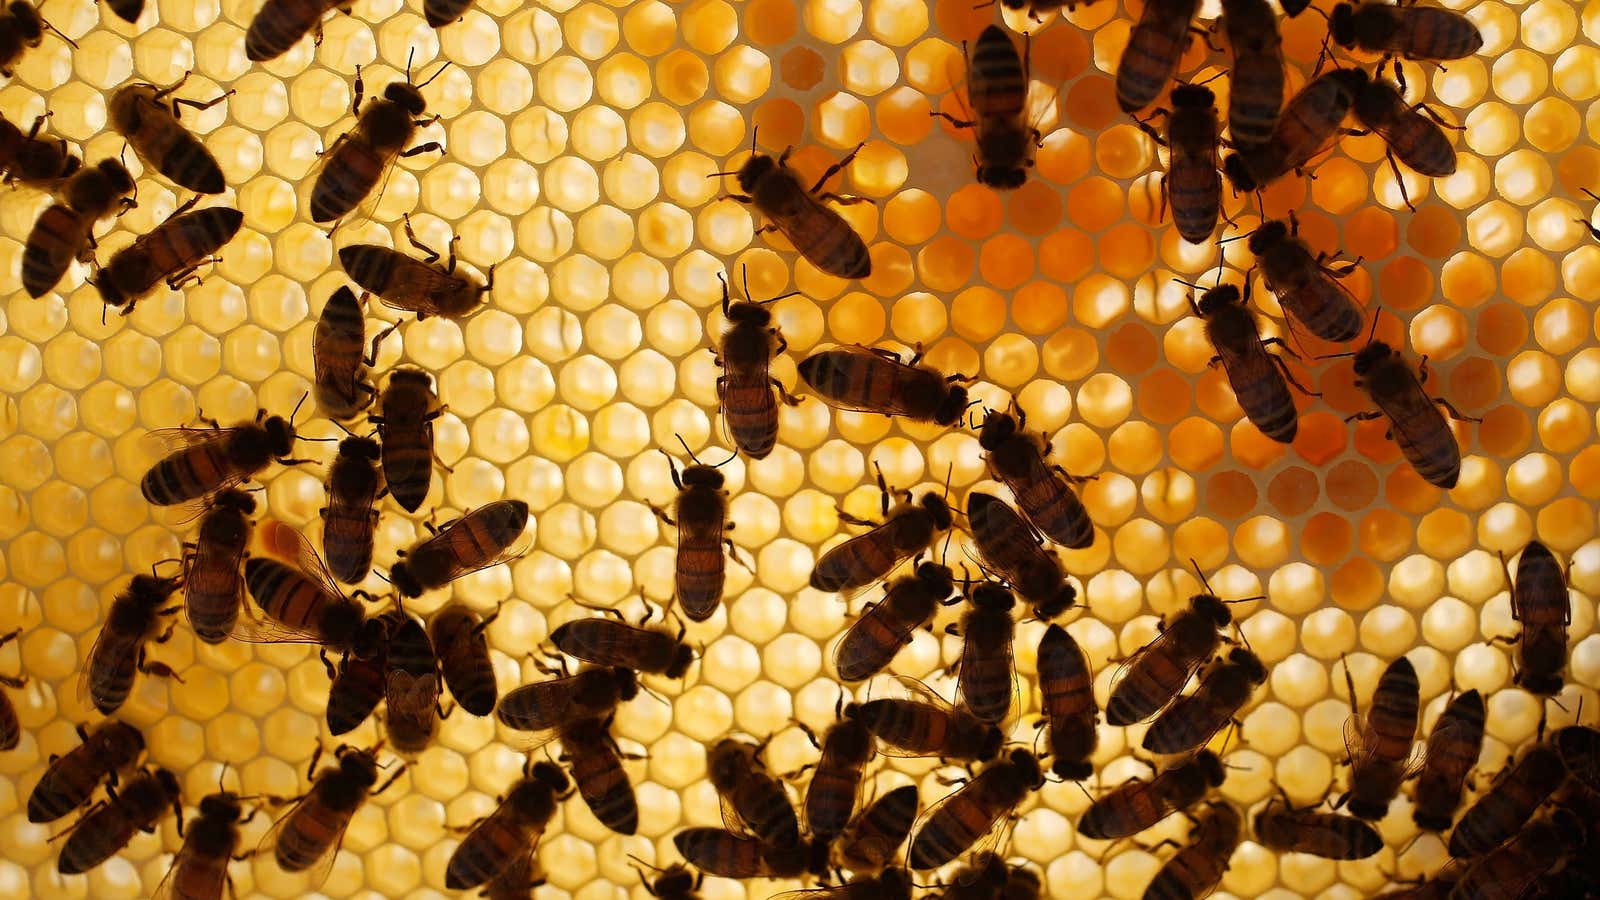 Bees live in complex environments, and make lots of decisions every day that are crucial for survival.